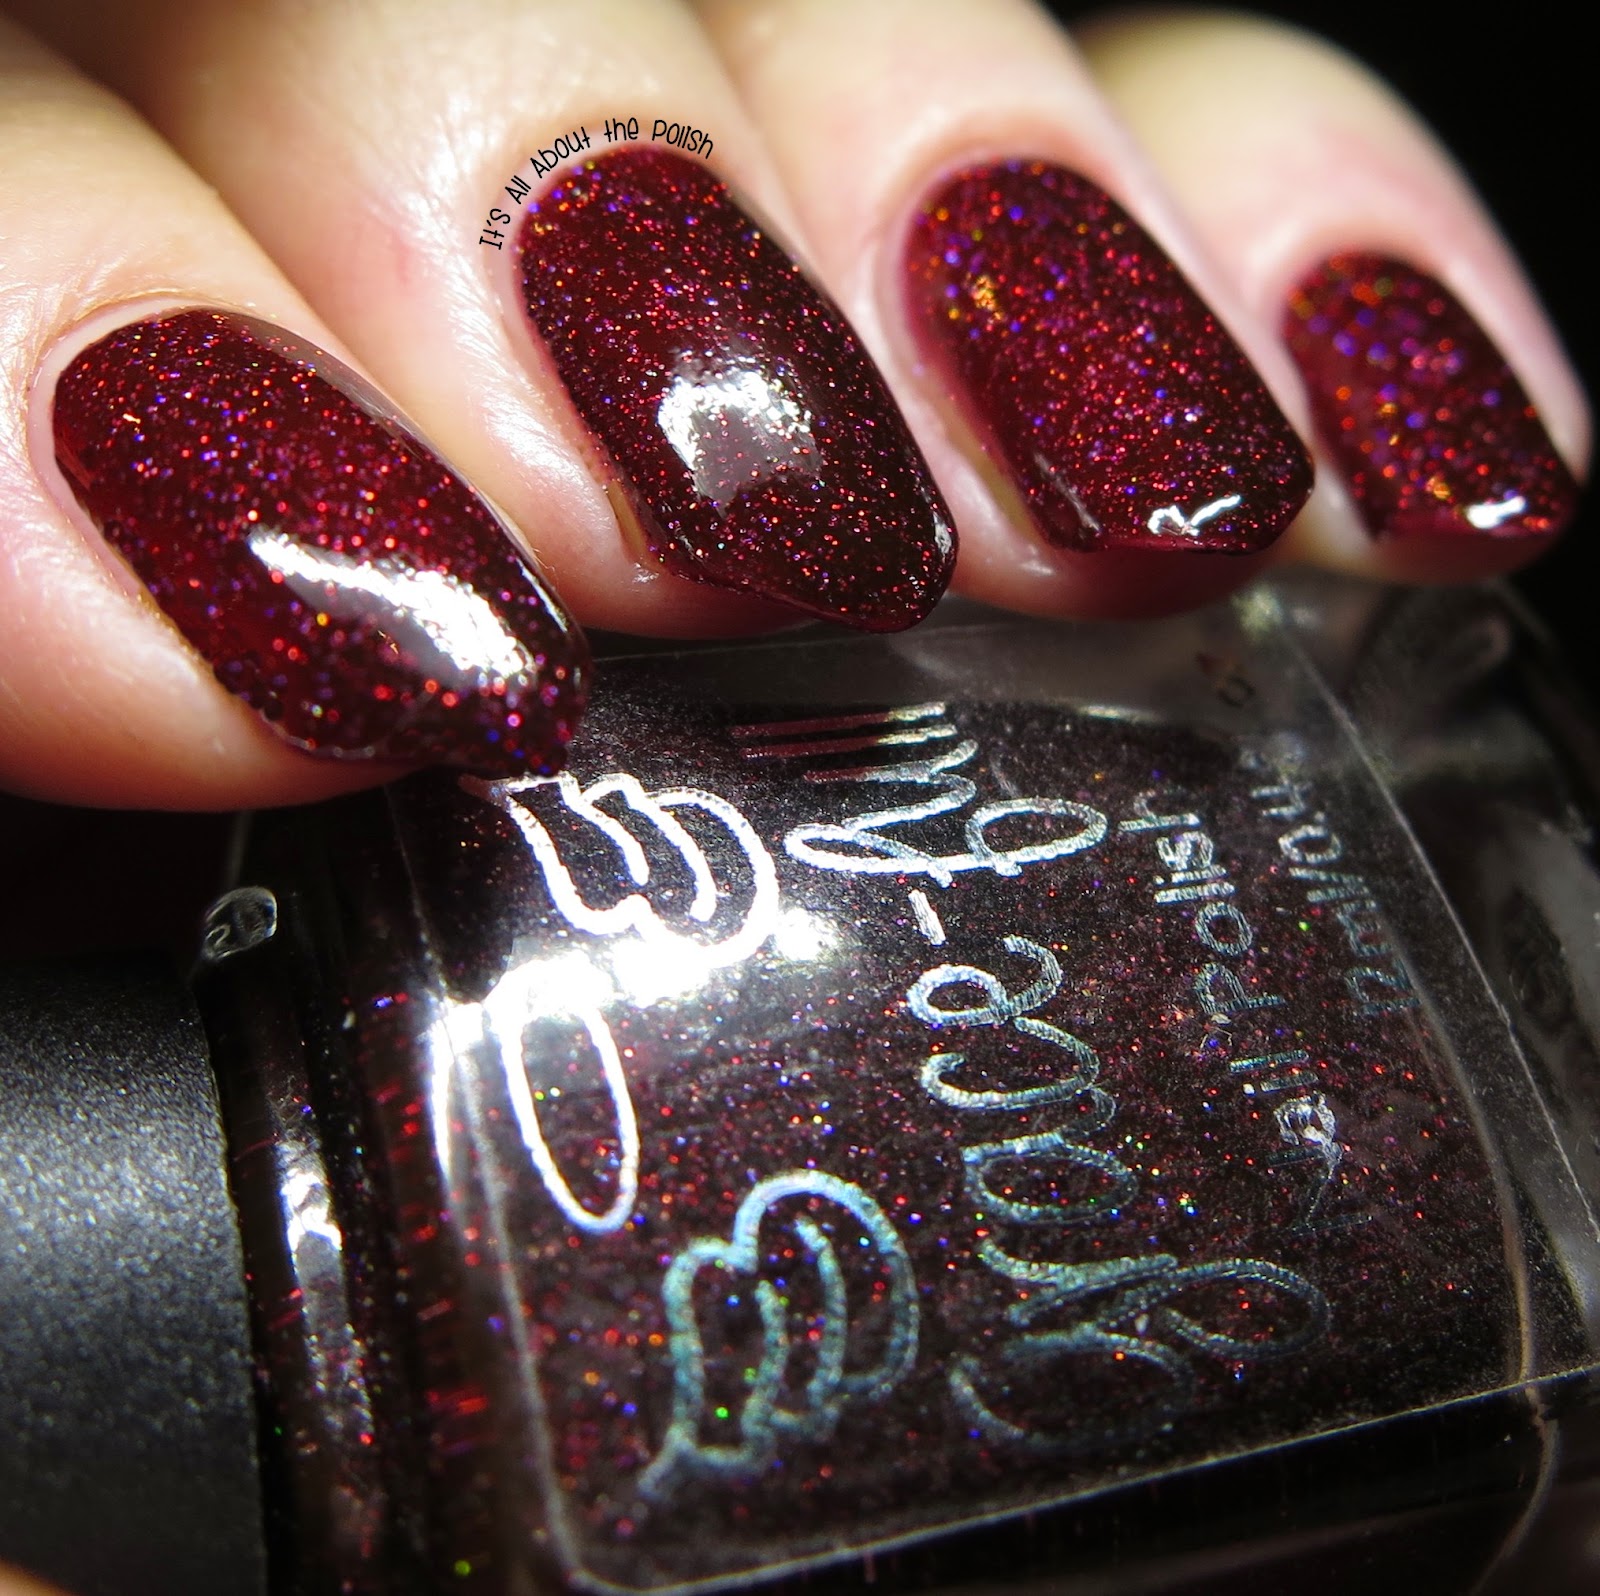 It's all about the polish: Grace-full Nail Polish - The Fireside Collection